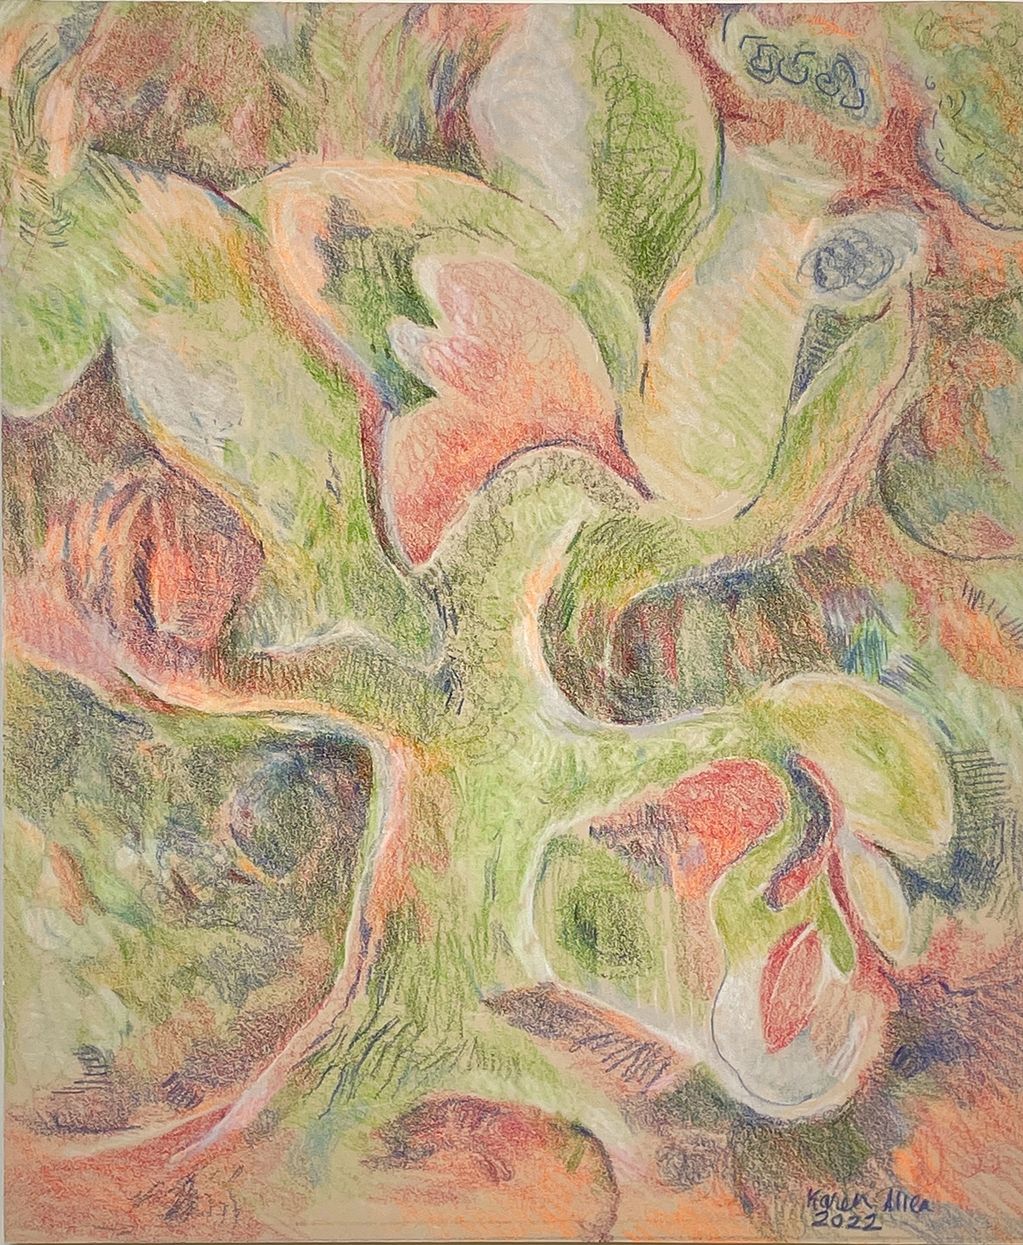 Day Dream Tree
Pastel Paper mounted on wood panel, 2022
14"x11" 